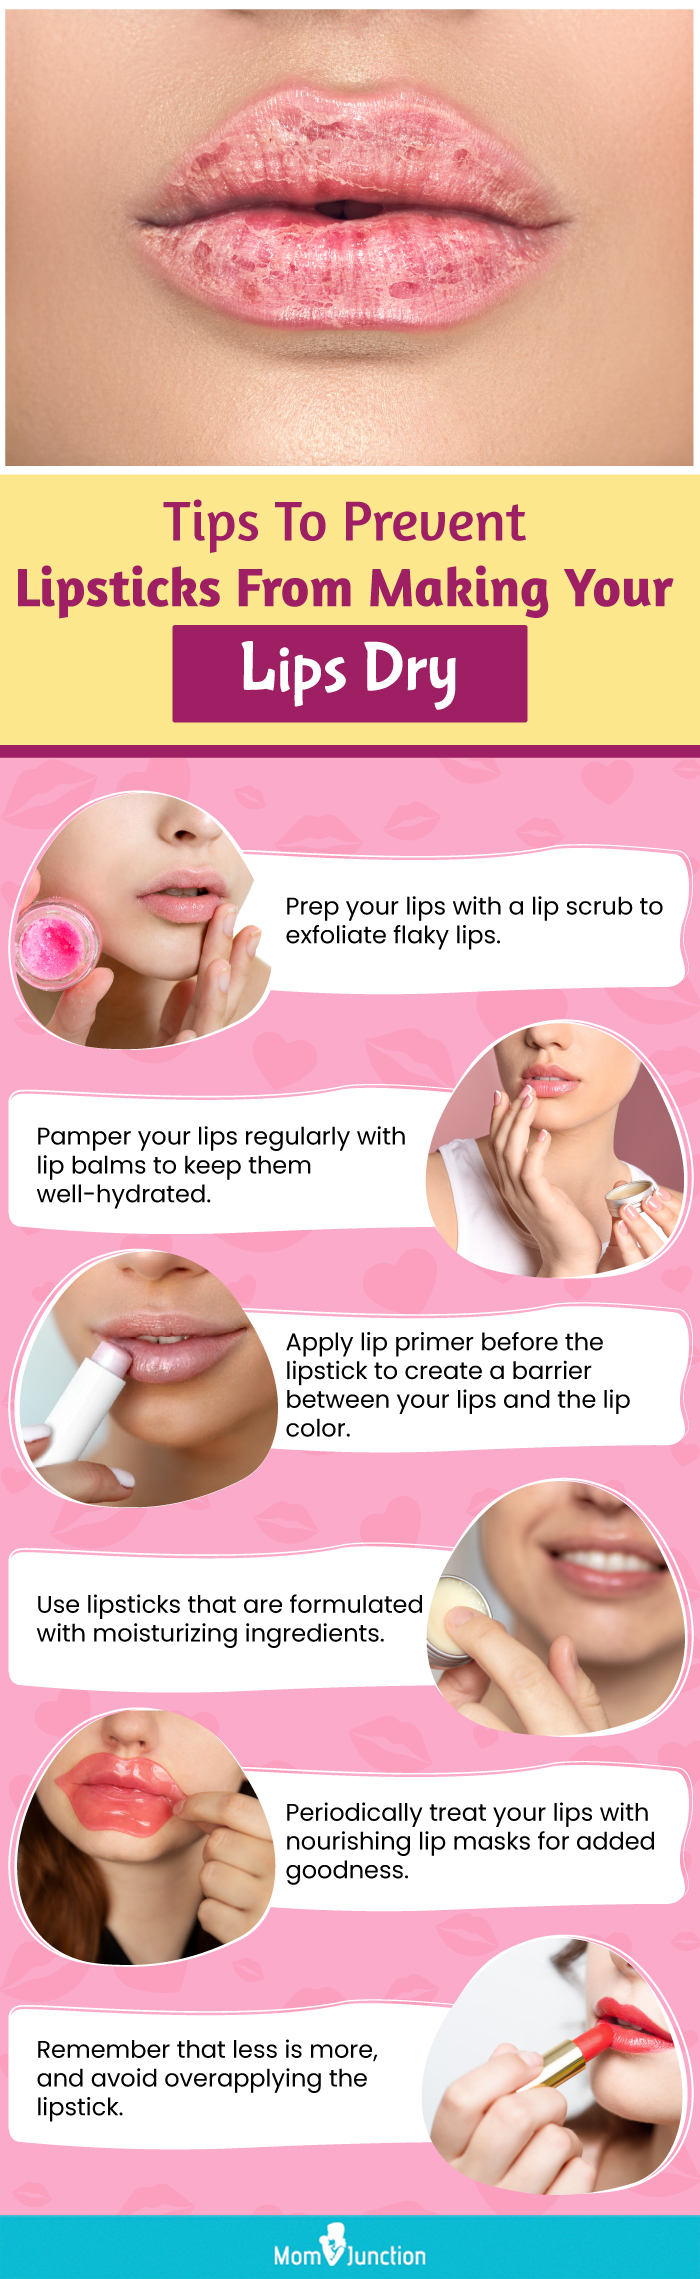 Tips To Prevent Lipsticks From Making Your Lips Dry (infographic)